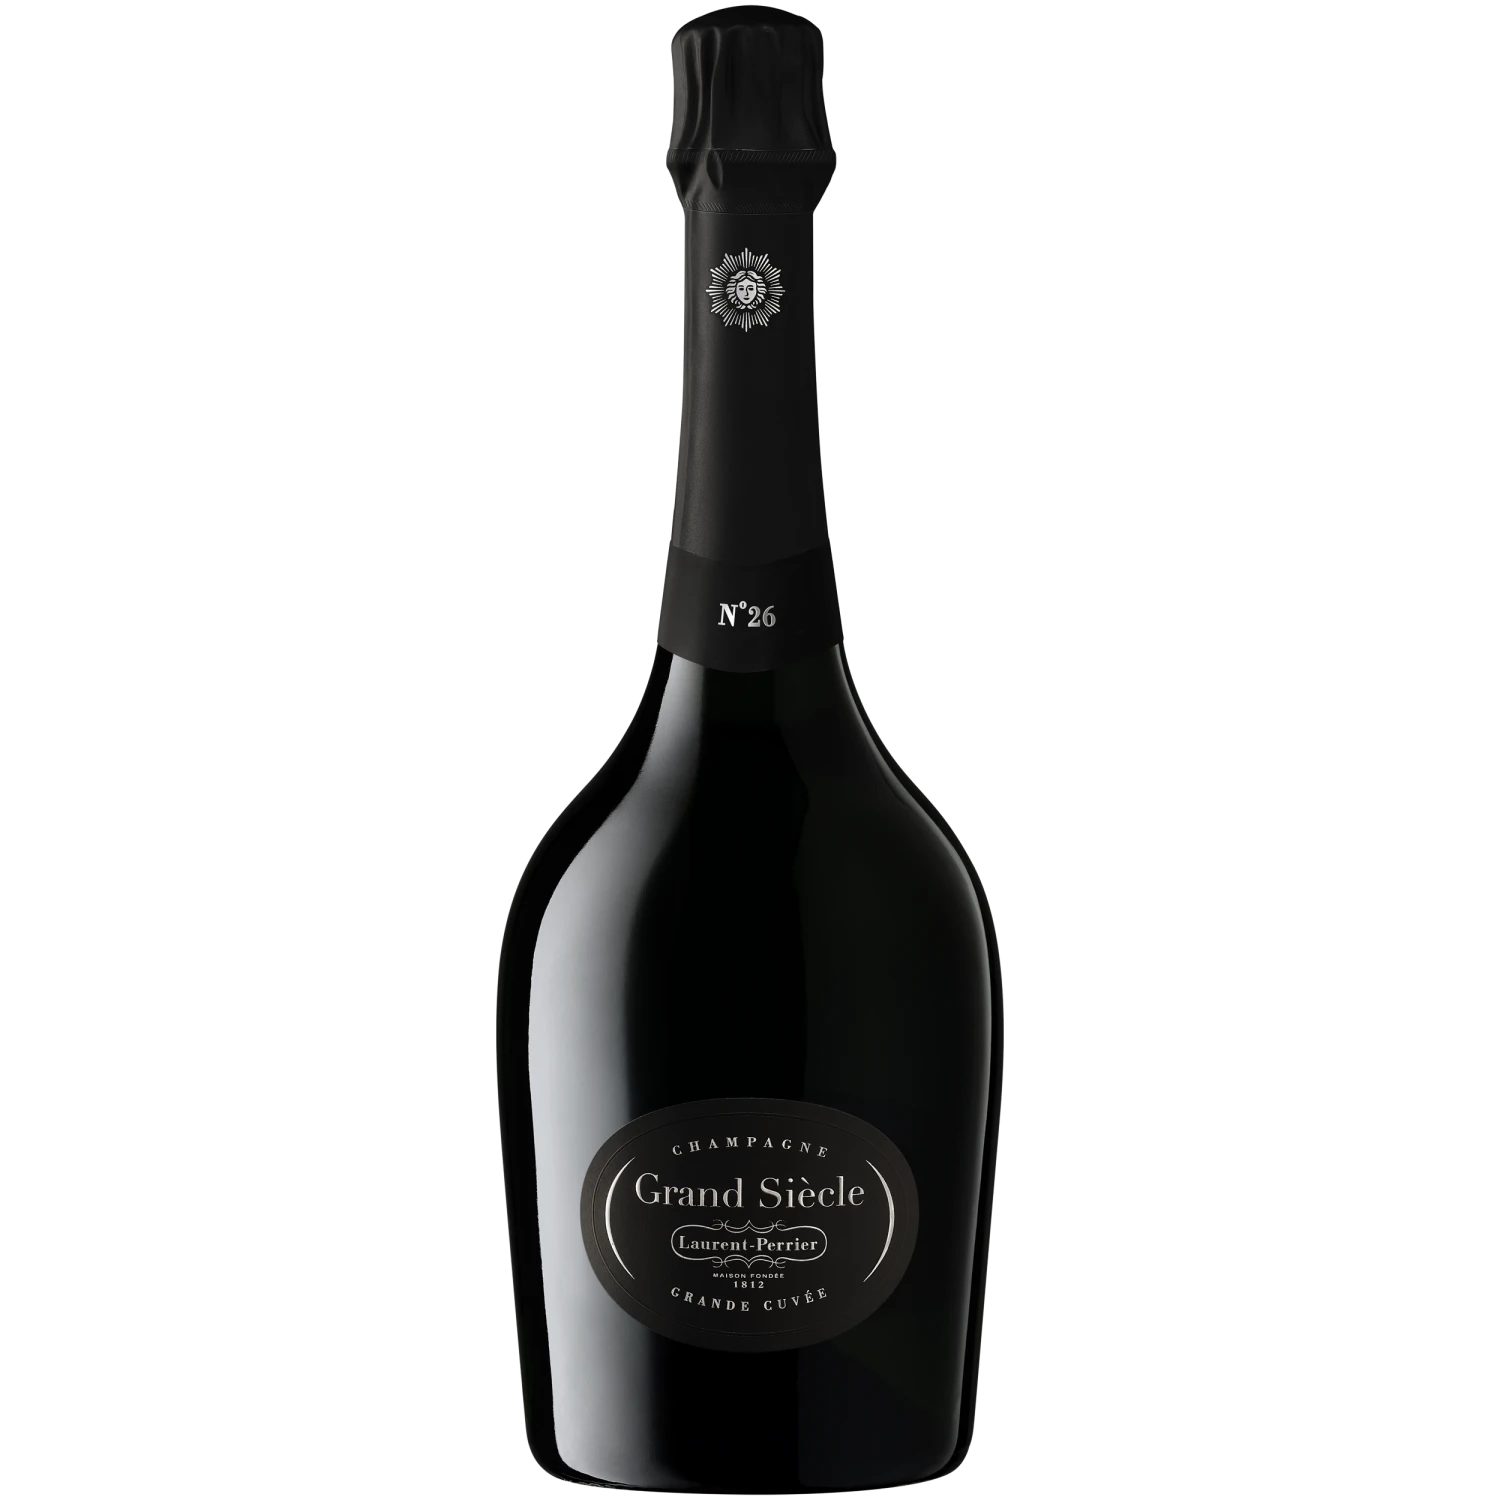 Laurent Perrier Grand Siecle Grand Cuvée No.26 NV